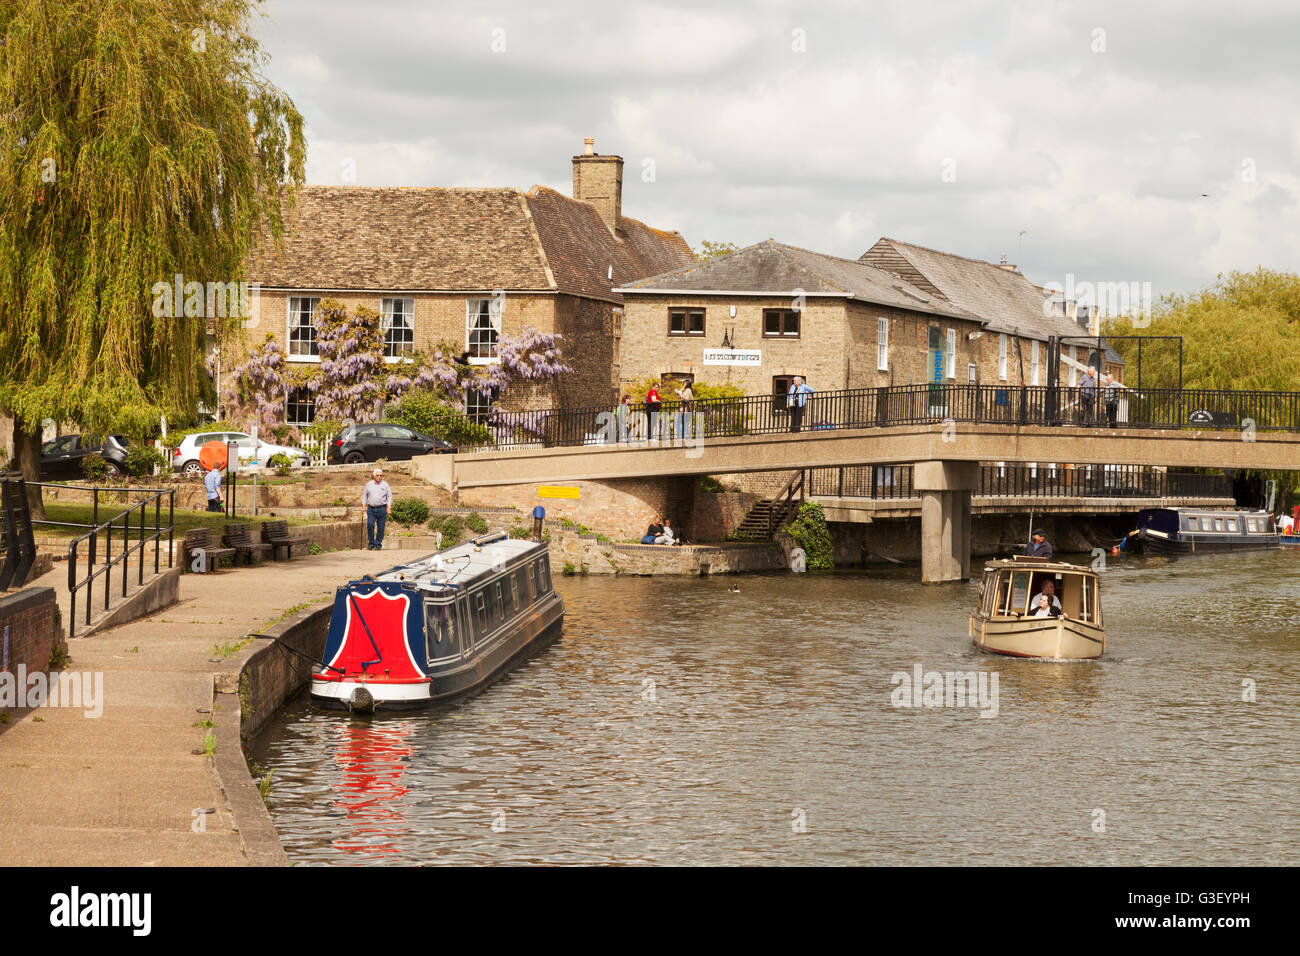 Boote am Fluss Great Ouse in Ely, Cambridgeshire, East Anglia UK Stockfoto